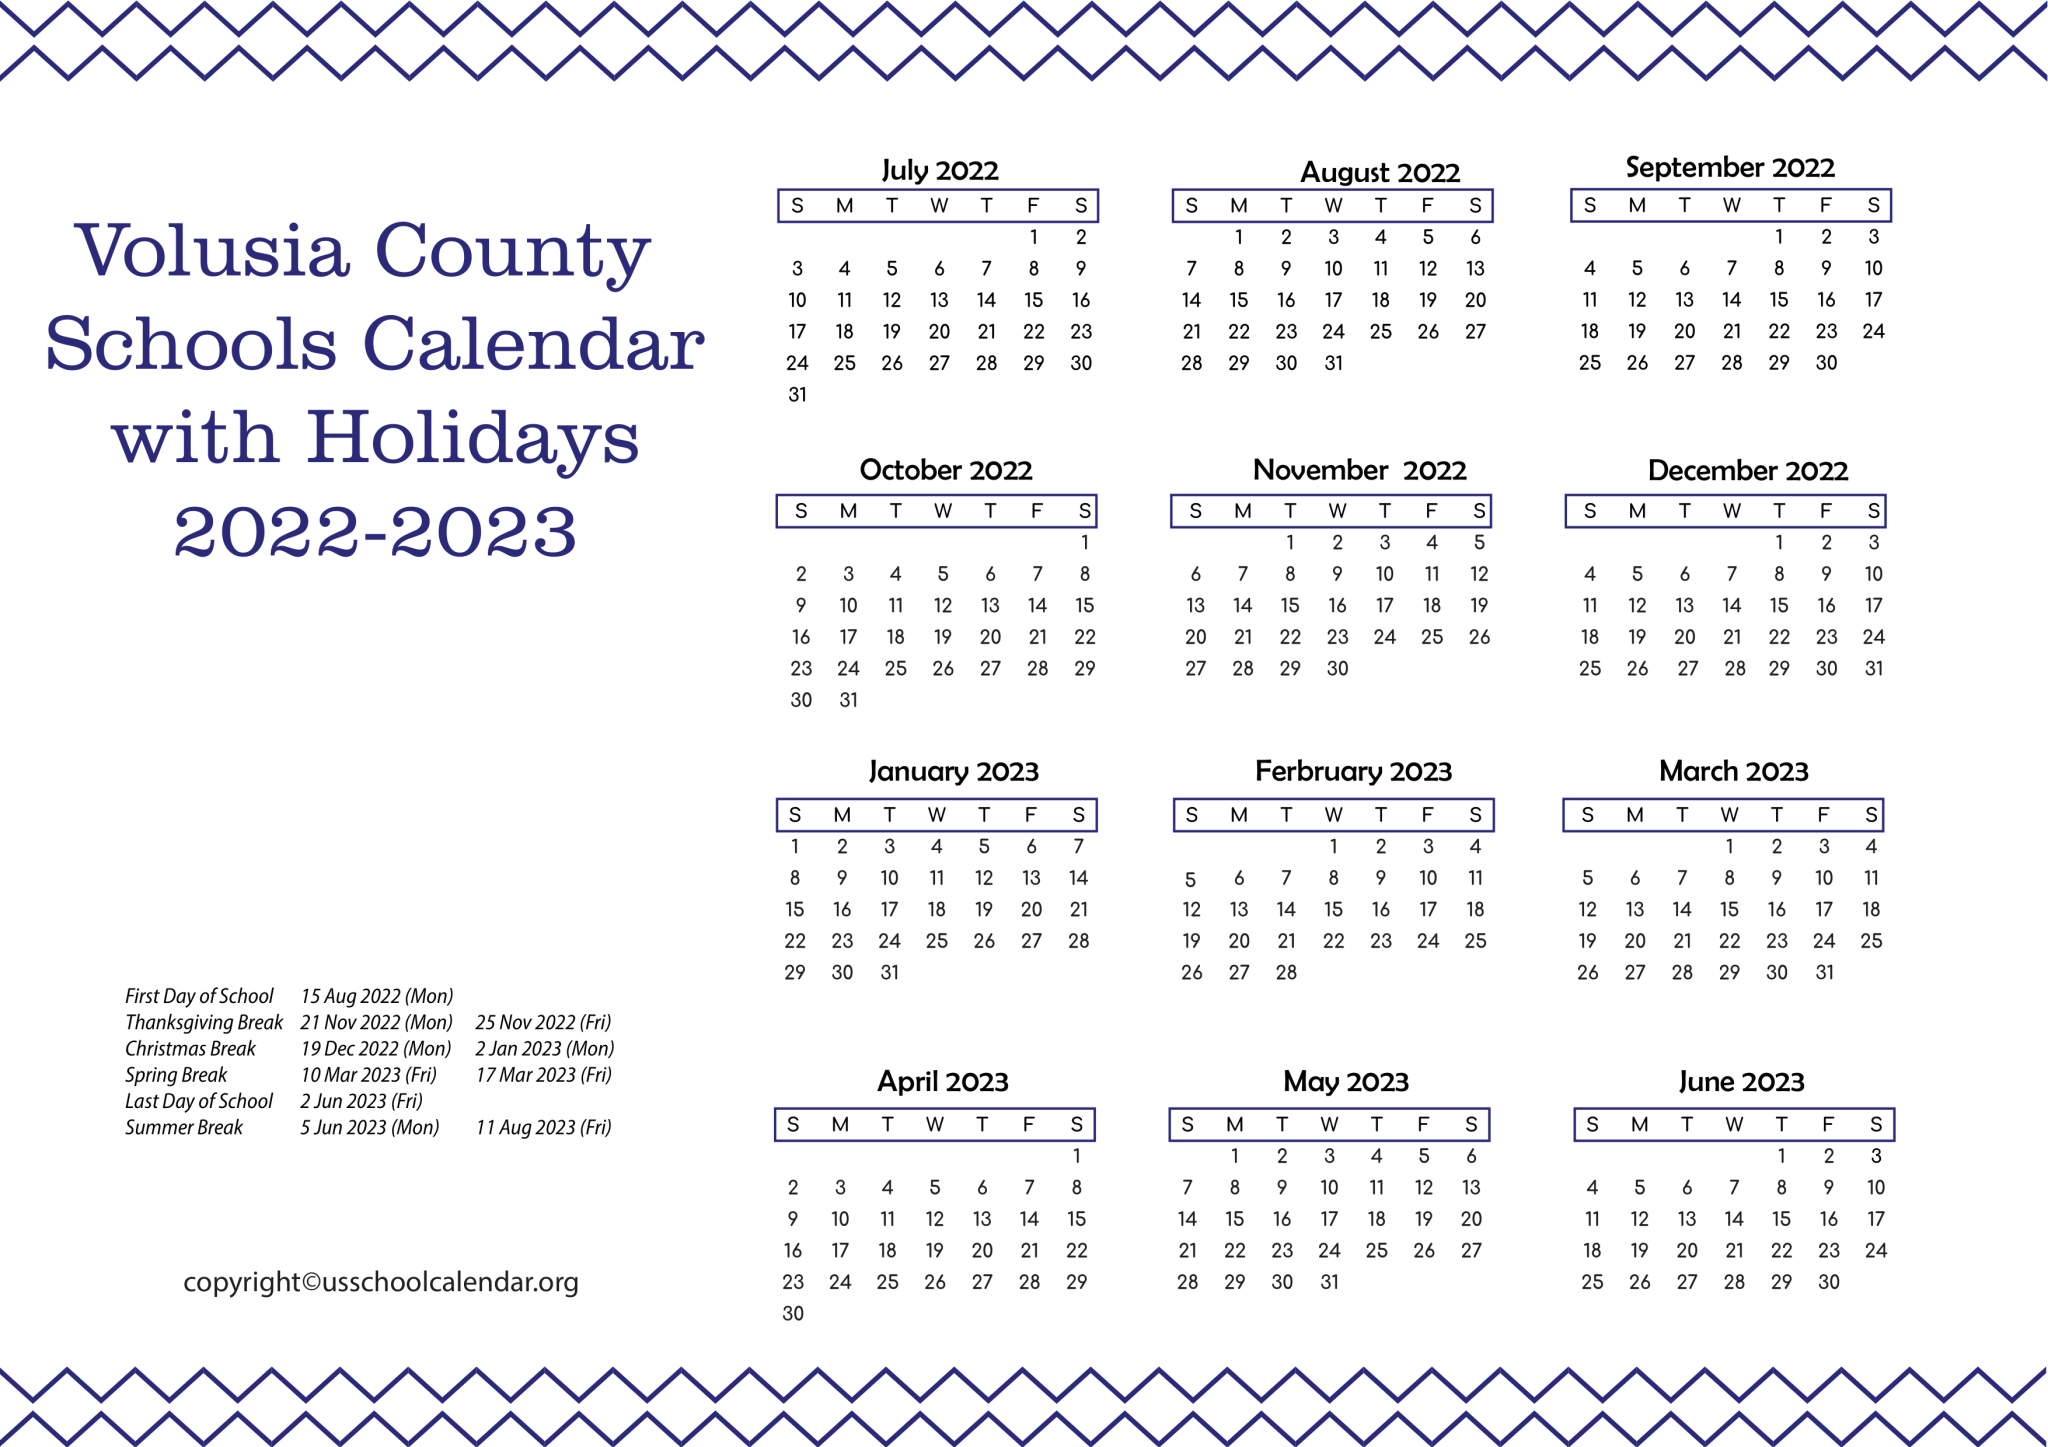 Volusia County Schools Calendar with Holidays 20222023